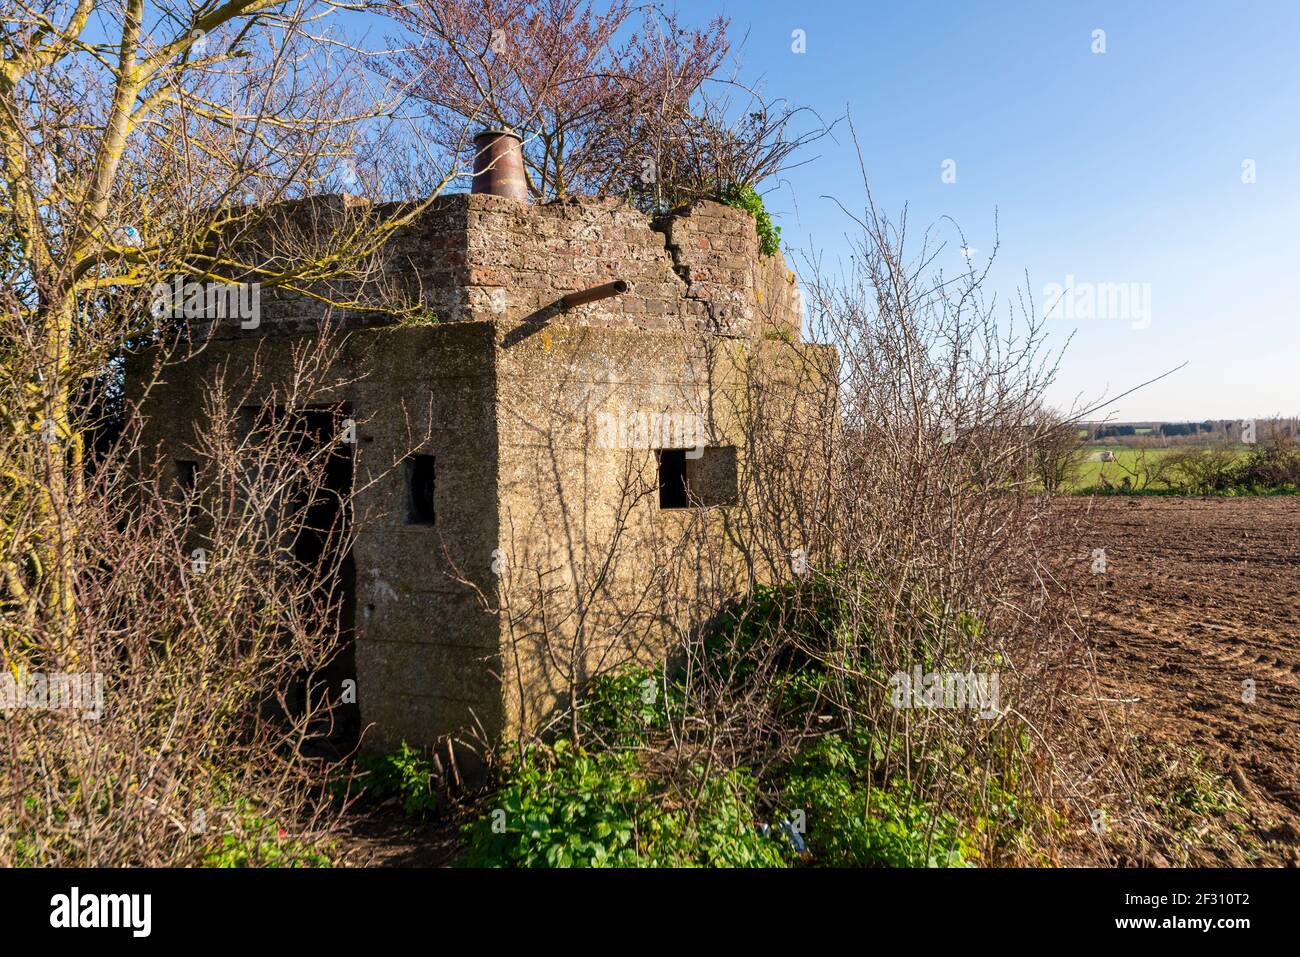 Wartime defence system on site of old RAF Chain Home radar station in Canewdon, Essex, UK. Gardiners Lane. Overgrown and decaying Stock Photo